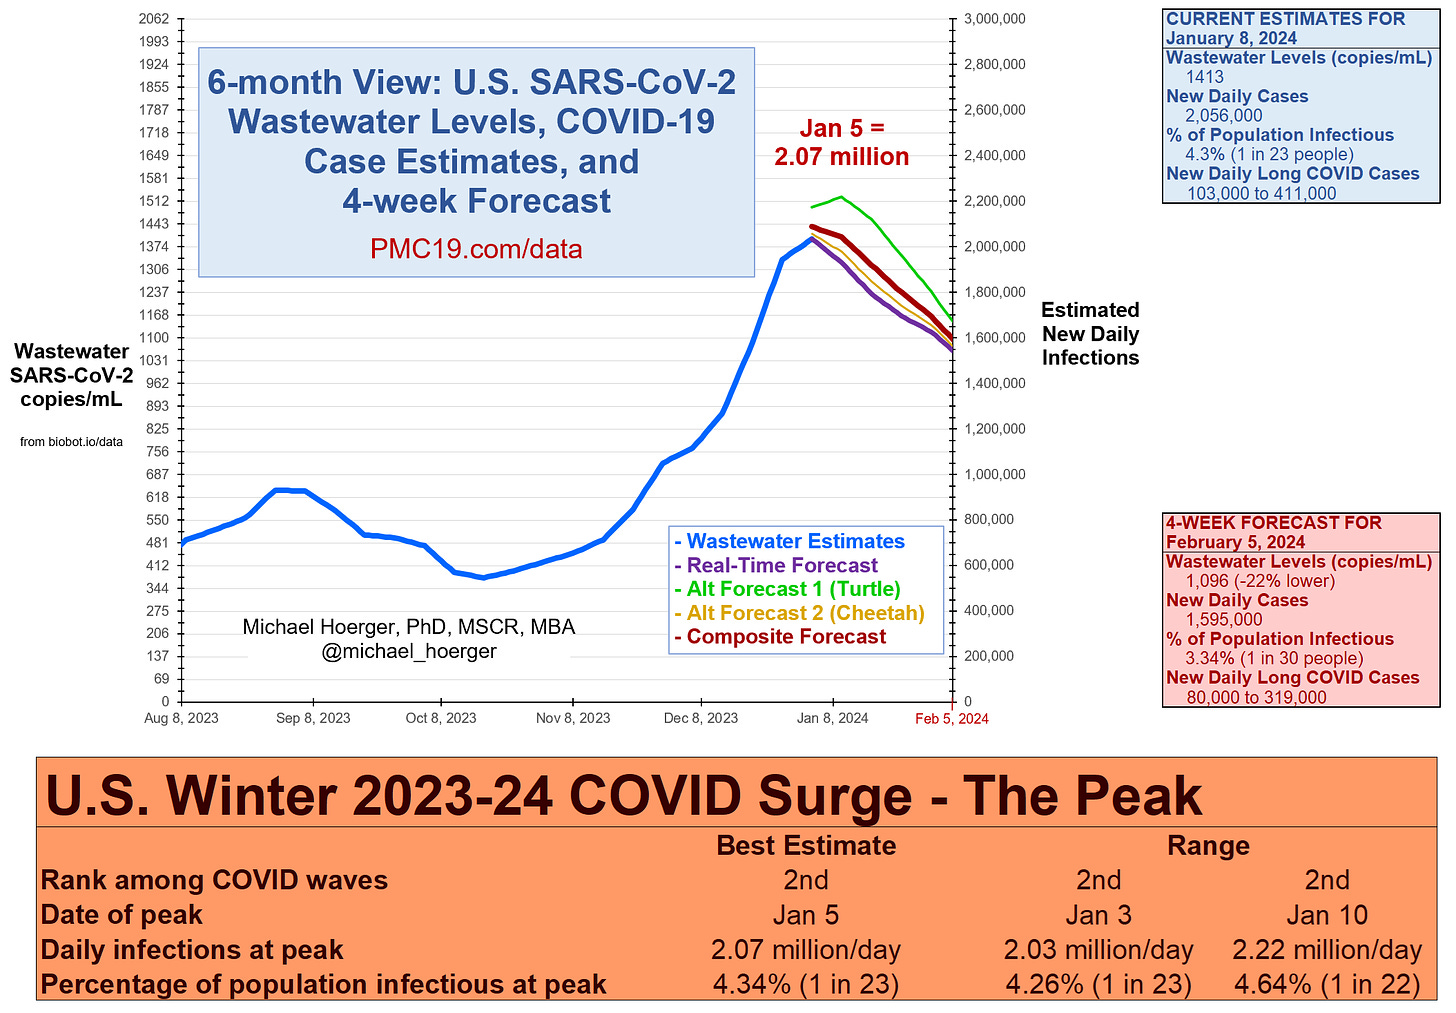 U.S. Winter 2023-24 COVID Surge - The Peak				
	Best Estimate		Range	
Rank among COVID waves	2nd		2nd	2nd
Date of peak	Jan 5		Jan 3	Jan 10
Daily infections at peak	2.07 million/day		2.03 million/day	2.22 million/day
Percentage of population infectious at peak	4.34% (1 in 23)		4.26% (1 in 23)	4.64% (1 in 22)

CURRENT ESTIMATES FOR
January 8, 2024
Wastewater Levels (copies/mL)
1413
New Daily Cases
2,056,000
% of Population Infectious
4.3% (1 in 23 people)
New Daily Long COVID Cases
 103,000 to 411,000 

4-WEEK FORECAST FOR
February 5, 2024
Wastewater Levels (copies/mL)
1,096 (-22% lower)
New Daily Cases
1,595,000
% of Population Infectious
3.34% (1 in 30 people)
New Daily Long COVID Cases
 80,000 to 319,000 
